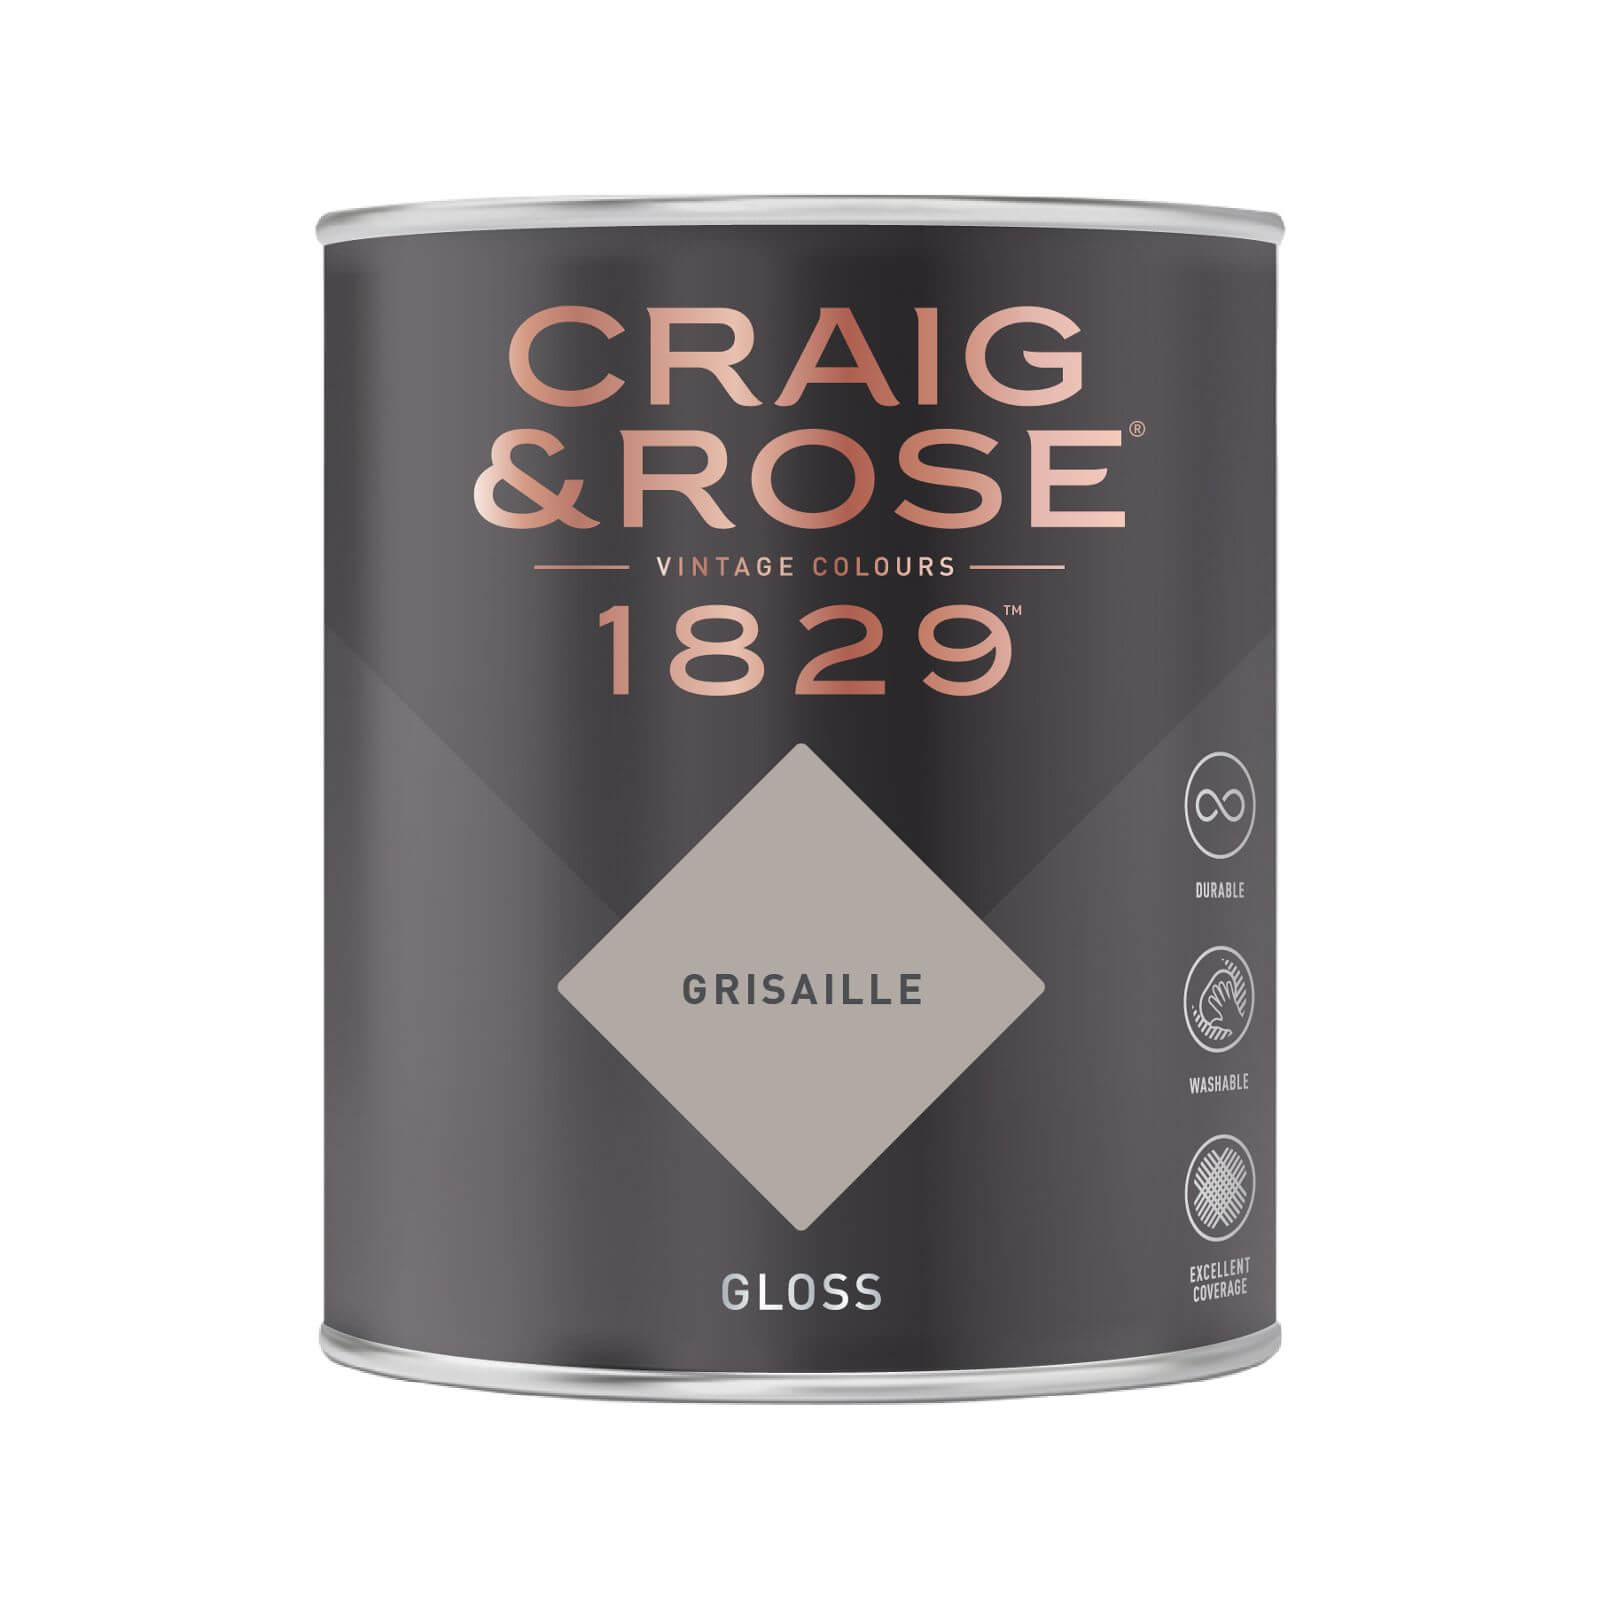 Craig & Rose 1829 Gloss Paint Grisaille - 750ml